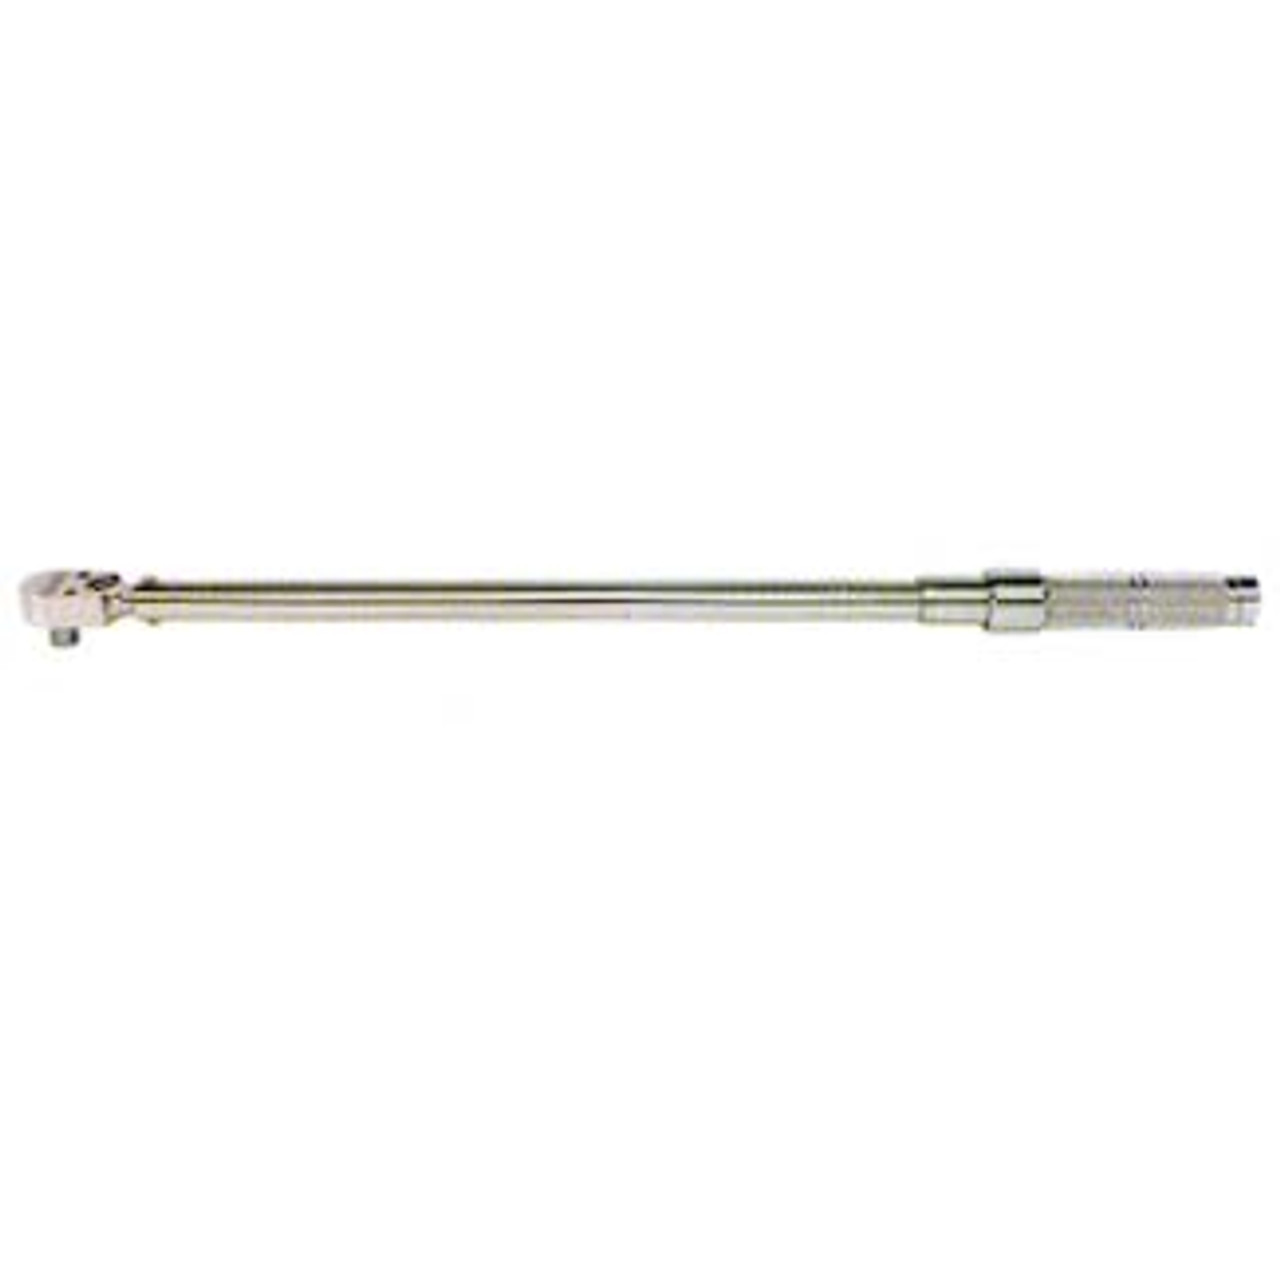 BIG DAWG and #153, Foot Pound Torque Wrench - Ratchet Head 6008F